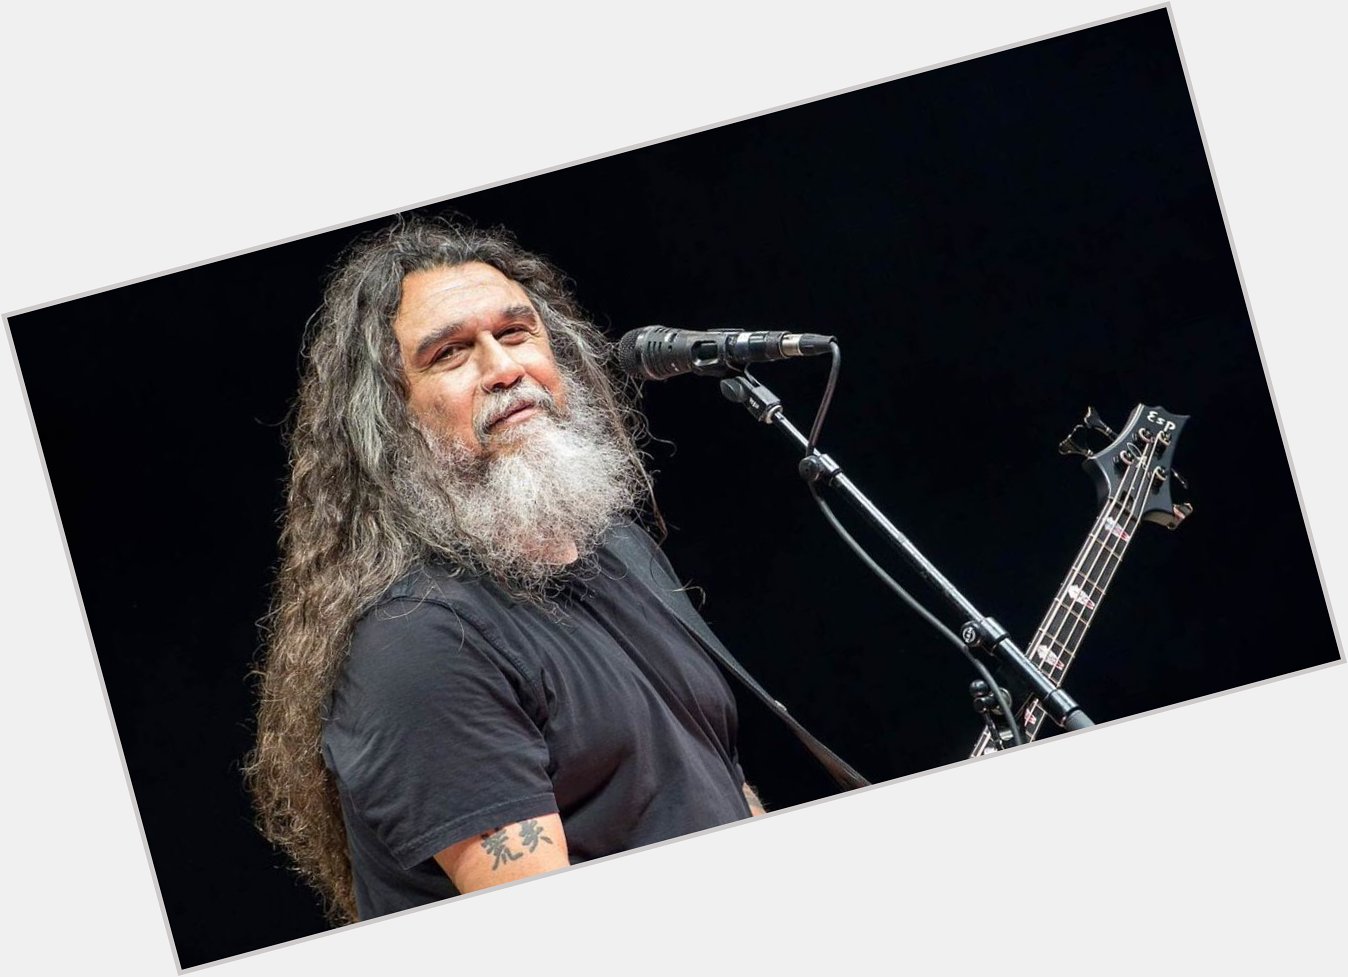 Today should be national holiday in Chile. Happy birthday to the legendary Tom Araya 